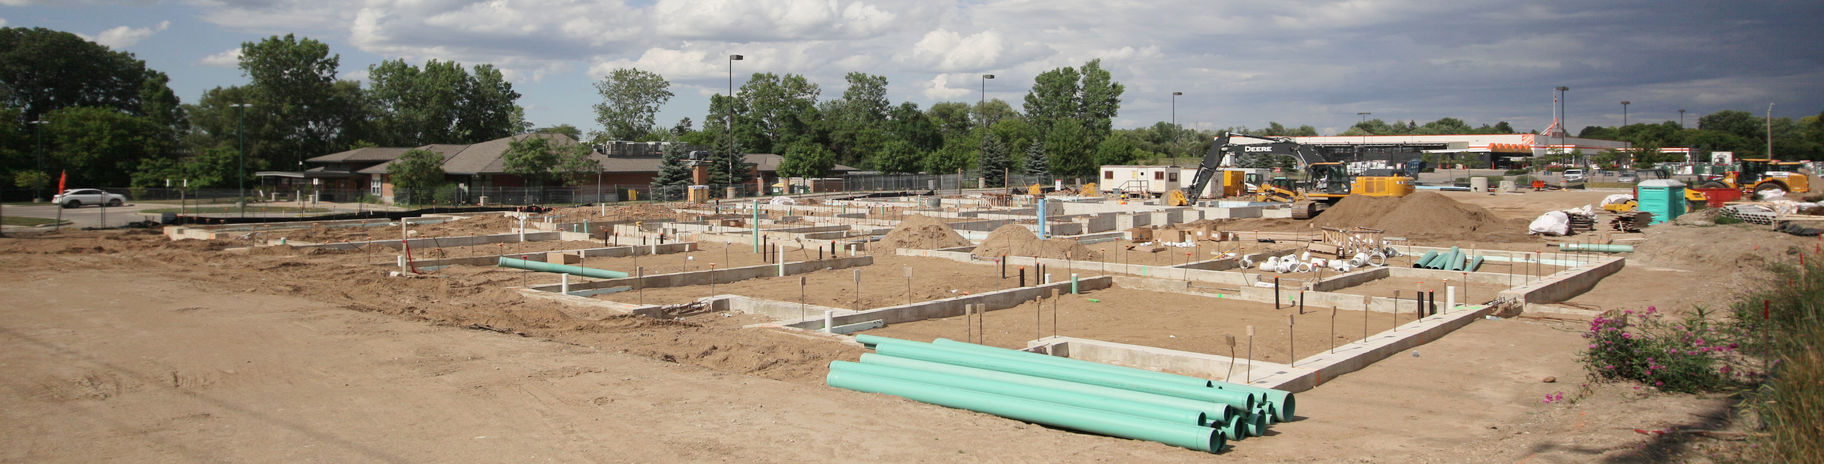 Development / construction site at 440 Clarke Road for a Zerin Development Corporation affordable housing project in London Ontario.